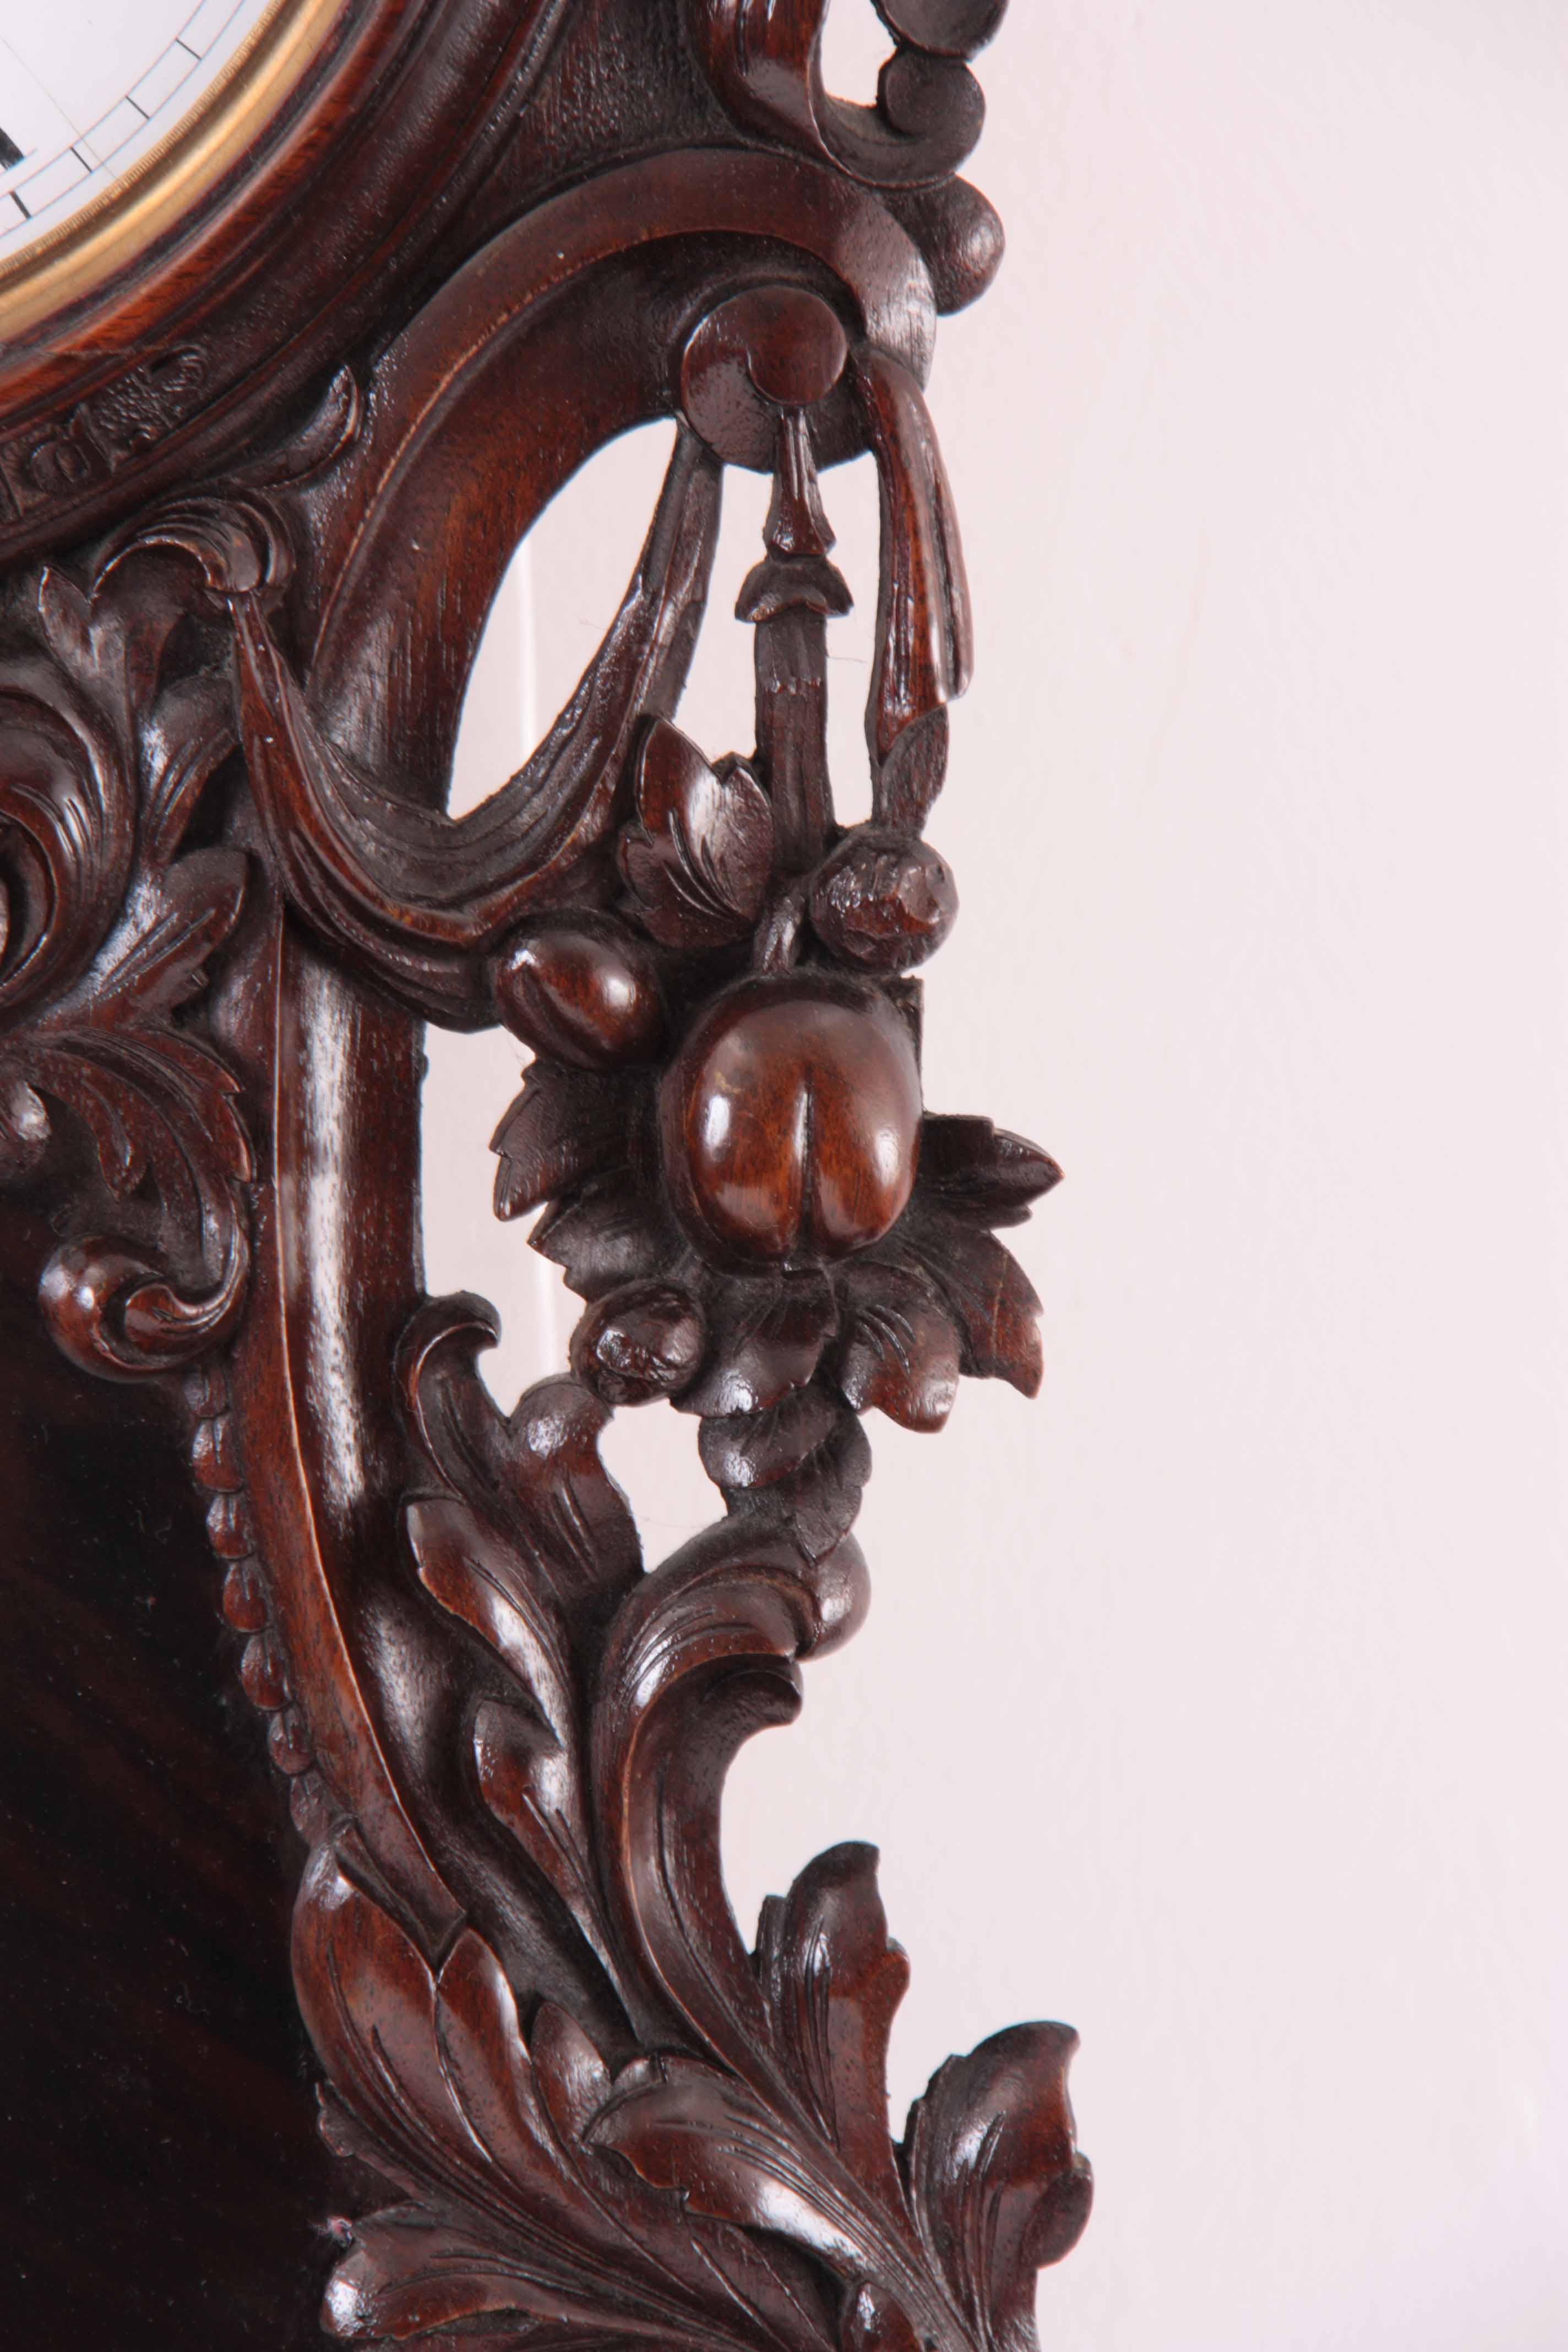 LENZKIRCH. A LATE 19TH CENTURY GERMAN VIENNA STYLE WALL CLOCK the mahogany serpentine case profusely - Image 6 of 6